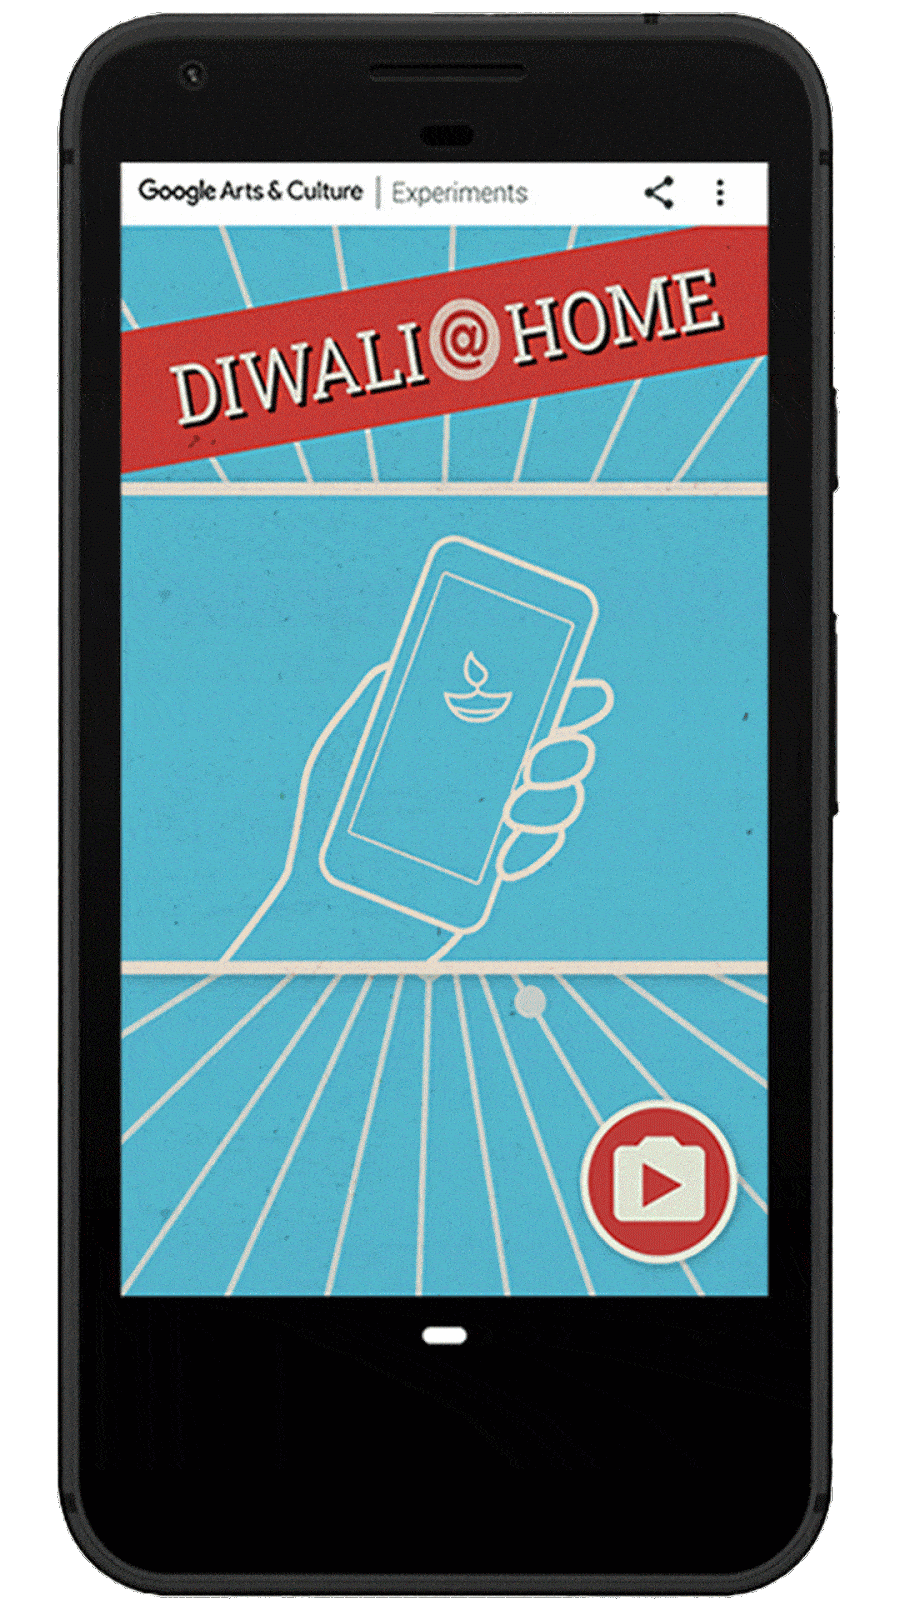 GIF showing augmented reality firecrackers for Diwali, on a smartphone